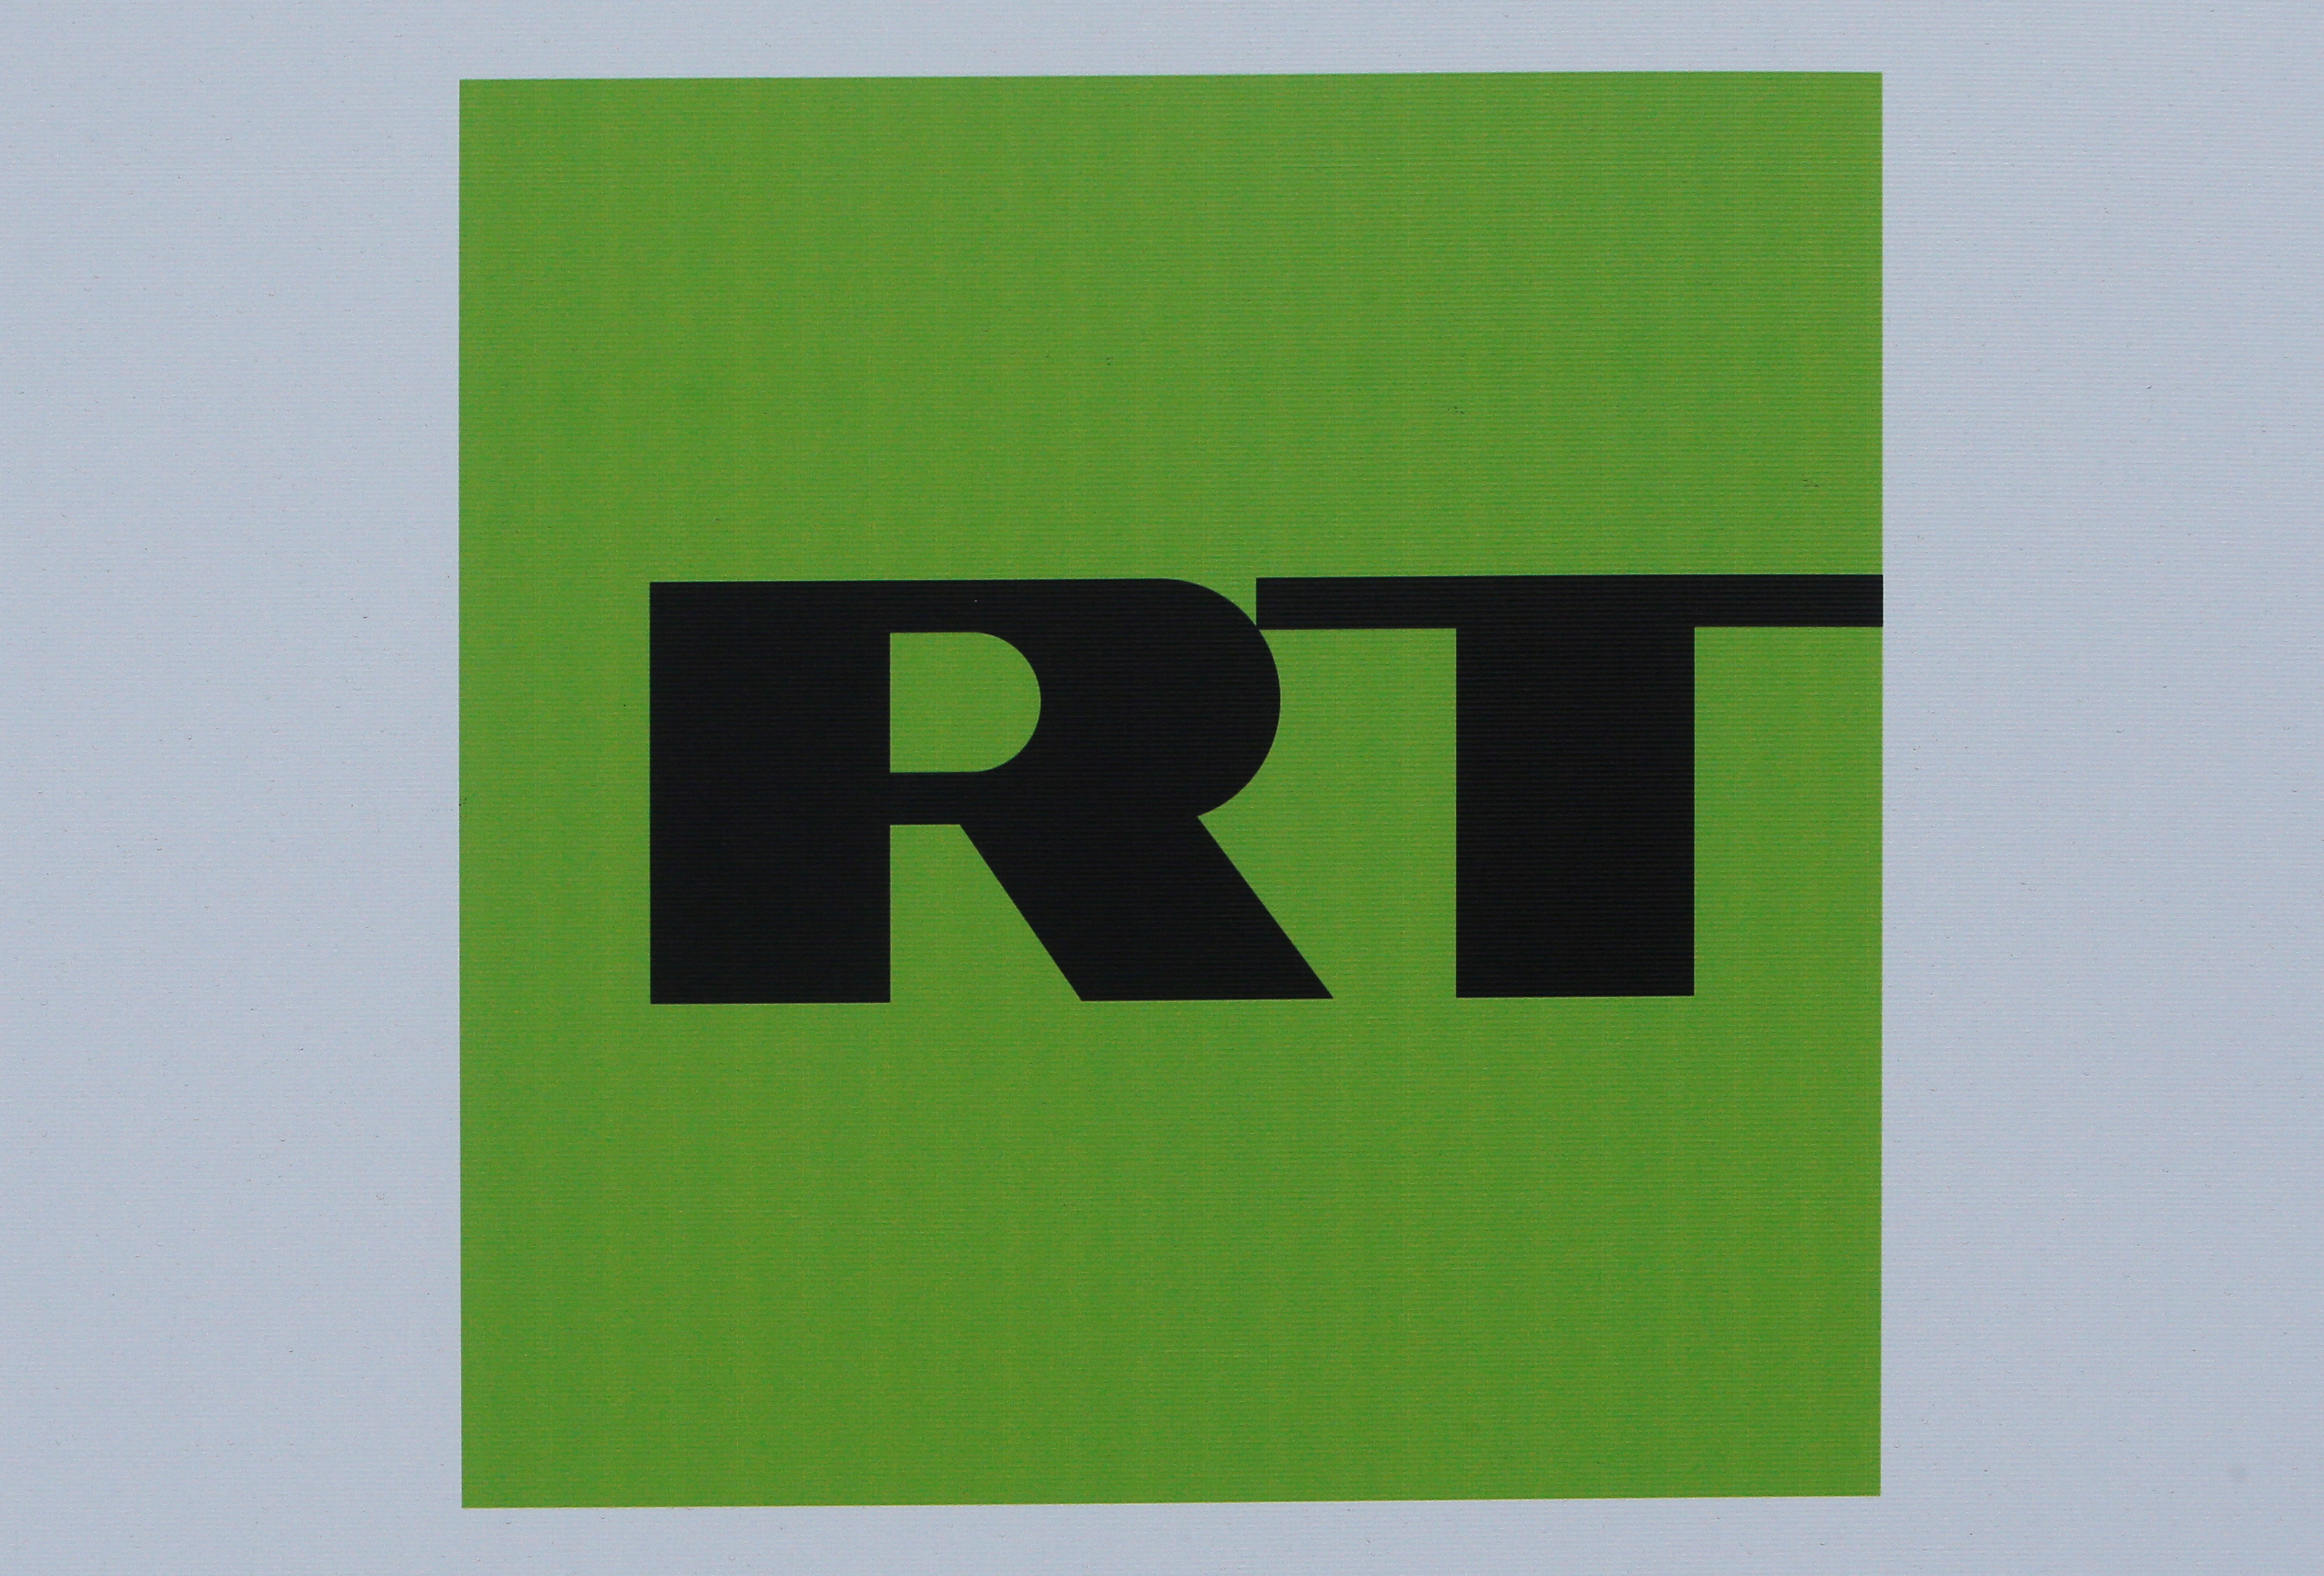 The logo of Russian television network RT is seen on a board at the SPIEF 2017 in St. Petersburg